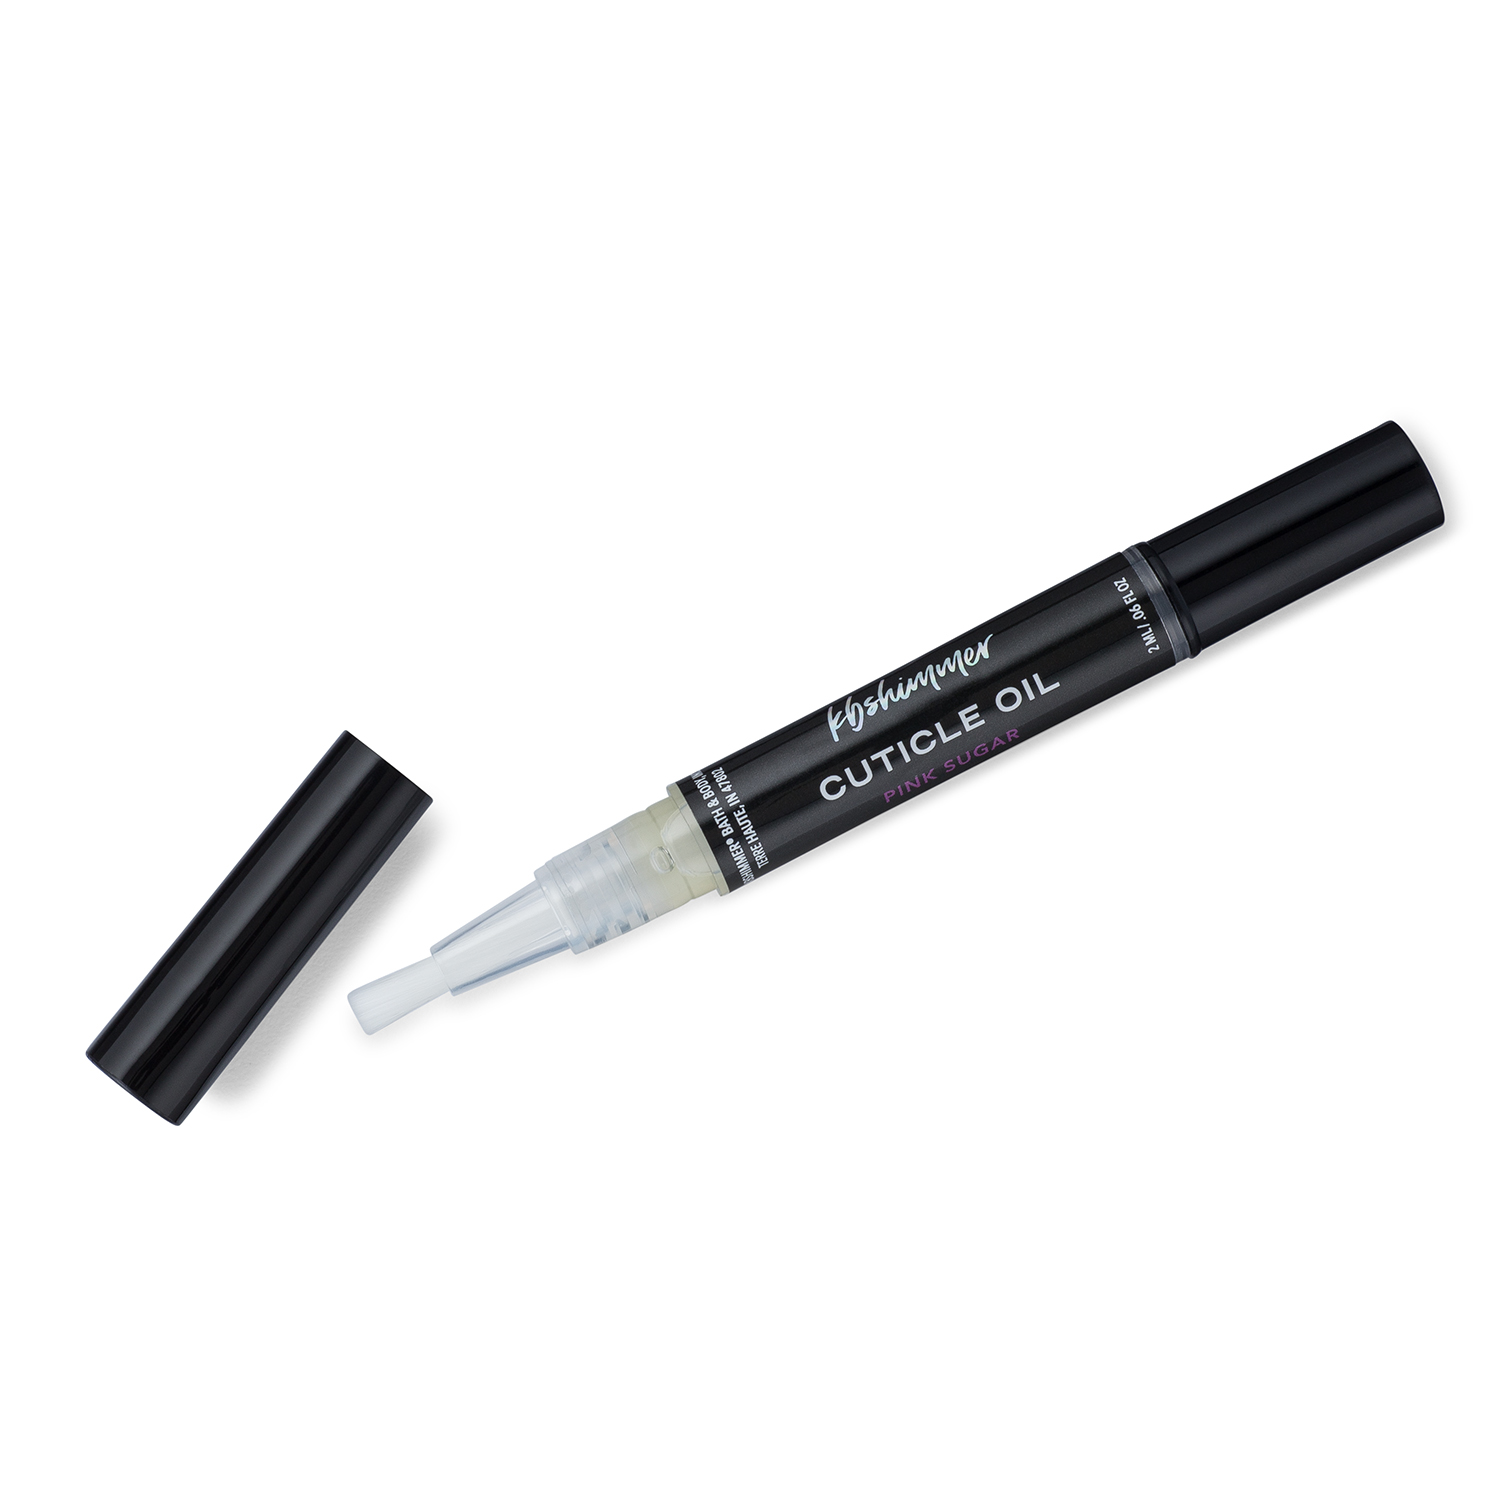 Organic Cuticle Oil Pen  Dr. Stamler's Sensitive Skin Care All-Natural,  Organic, Handcrafted for Sensitive Skin